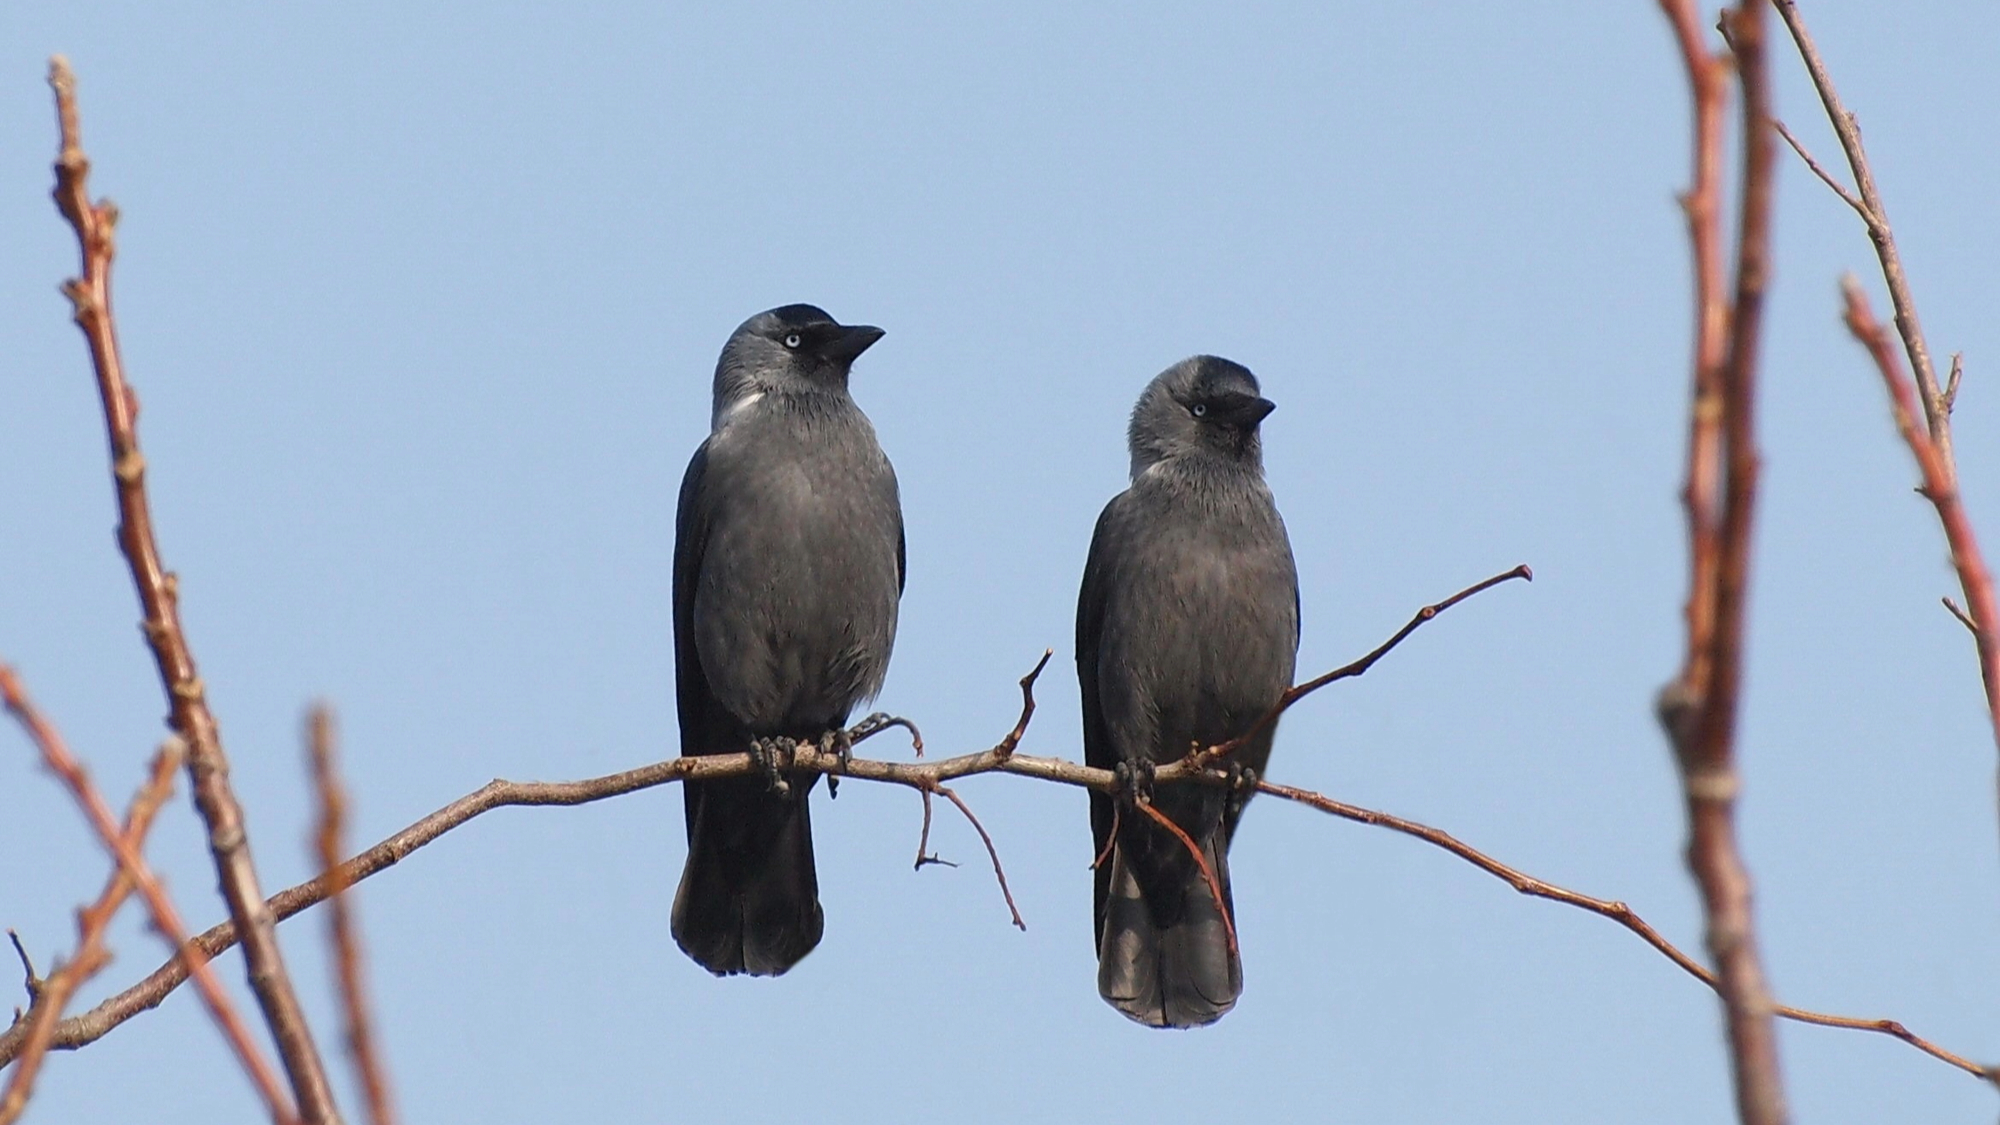 two jackdaws (Corvus monedula) on a branch